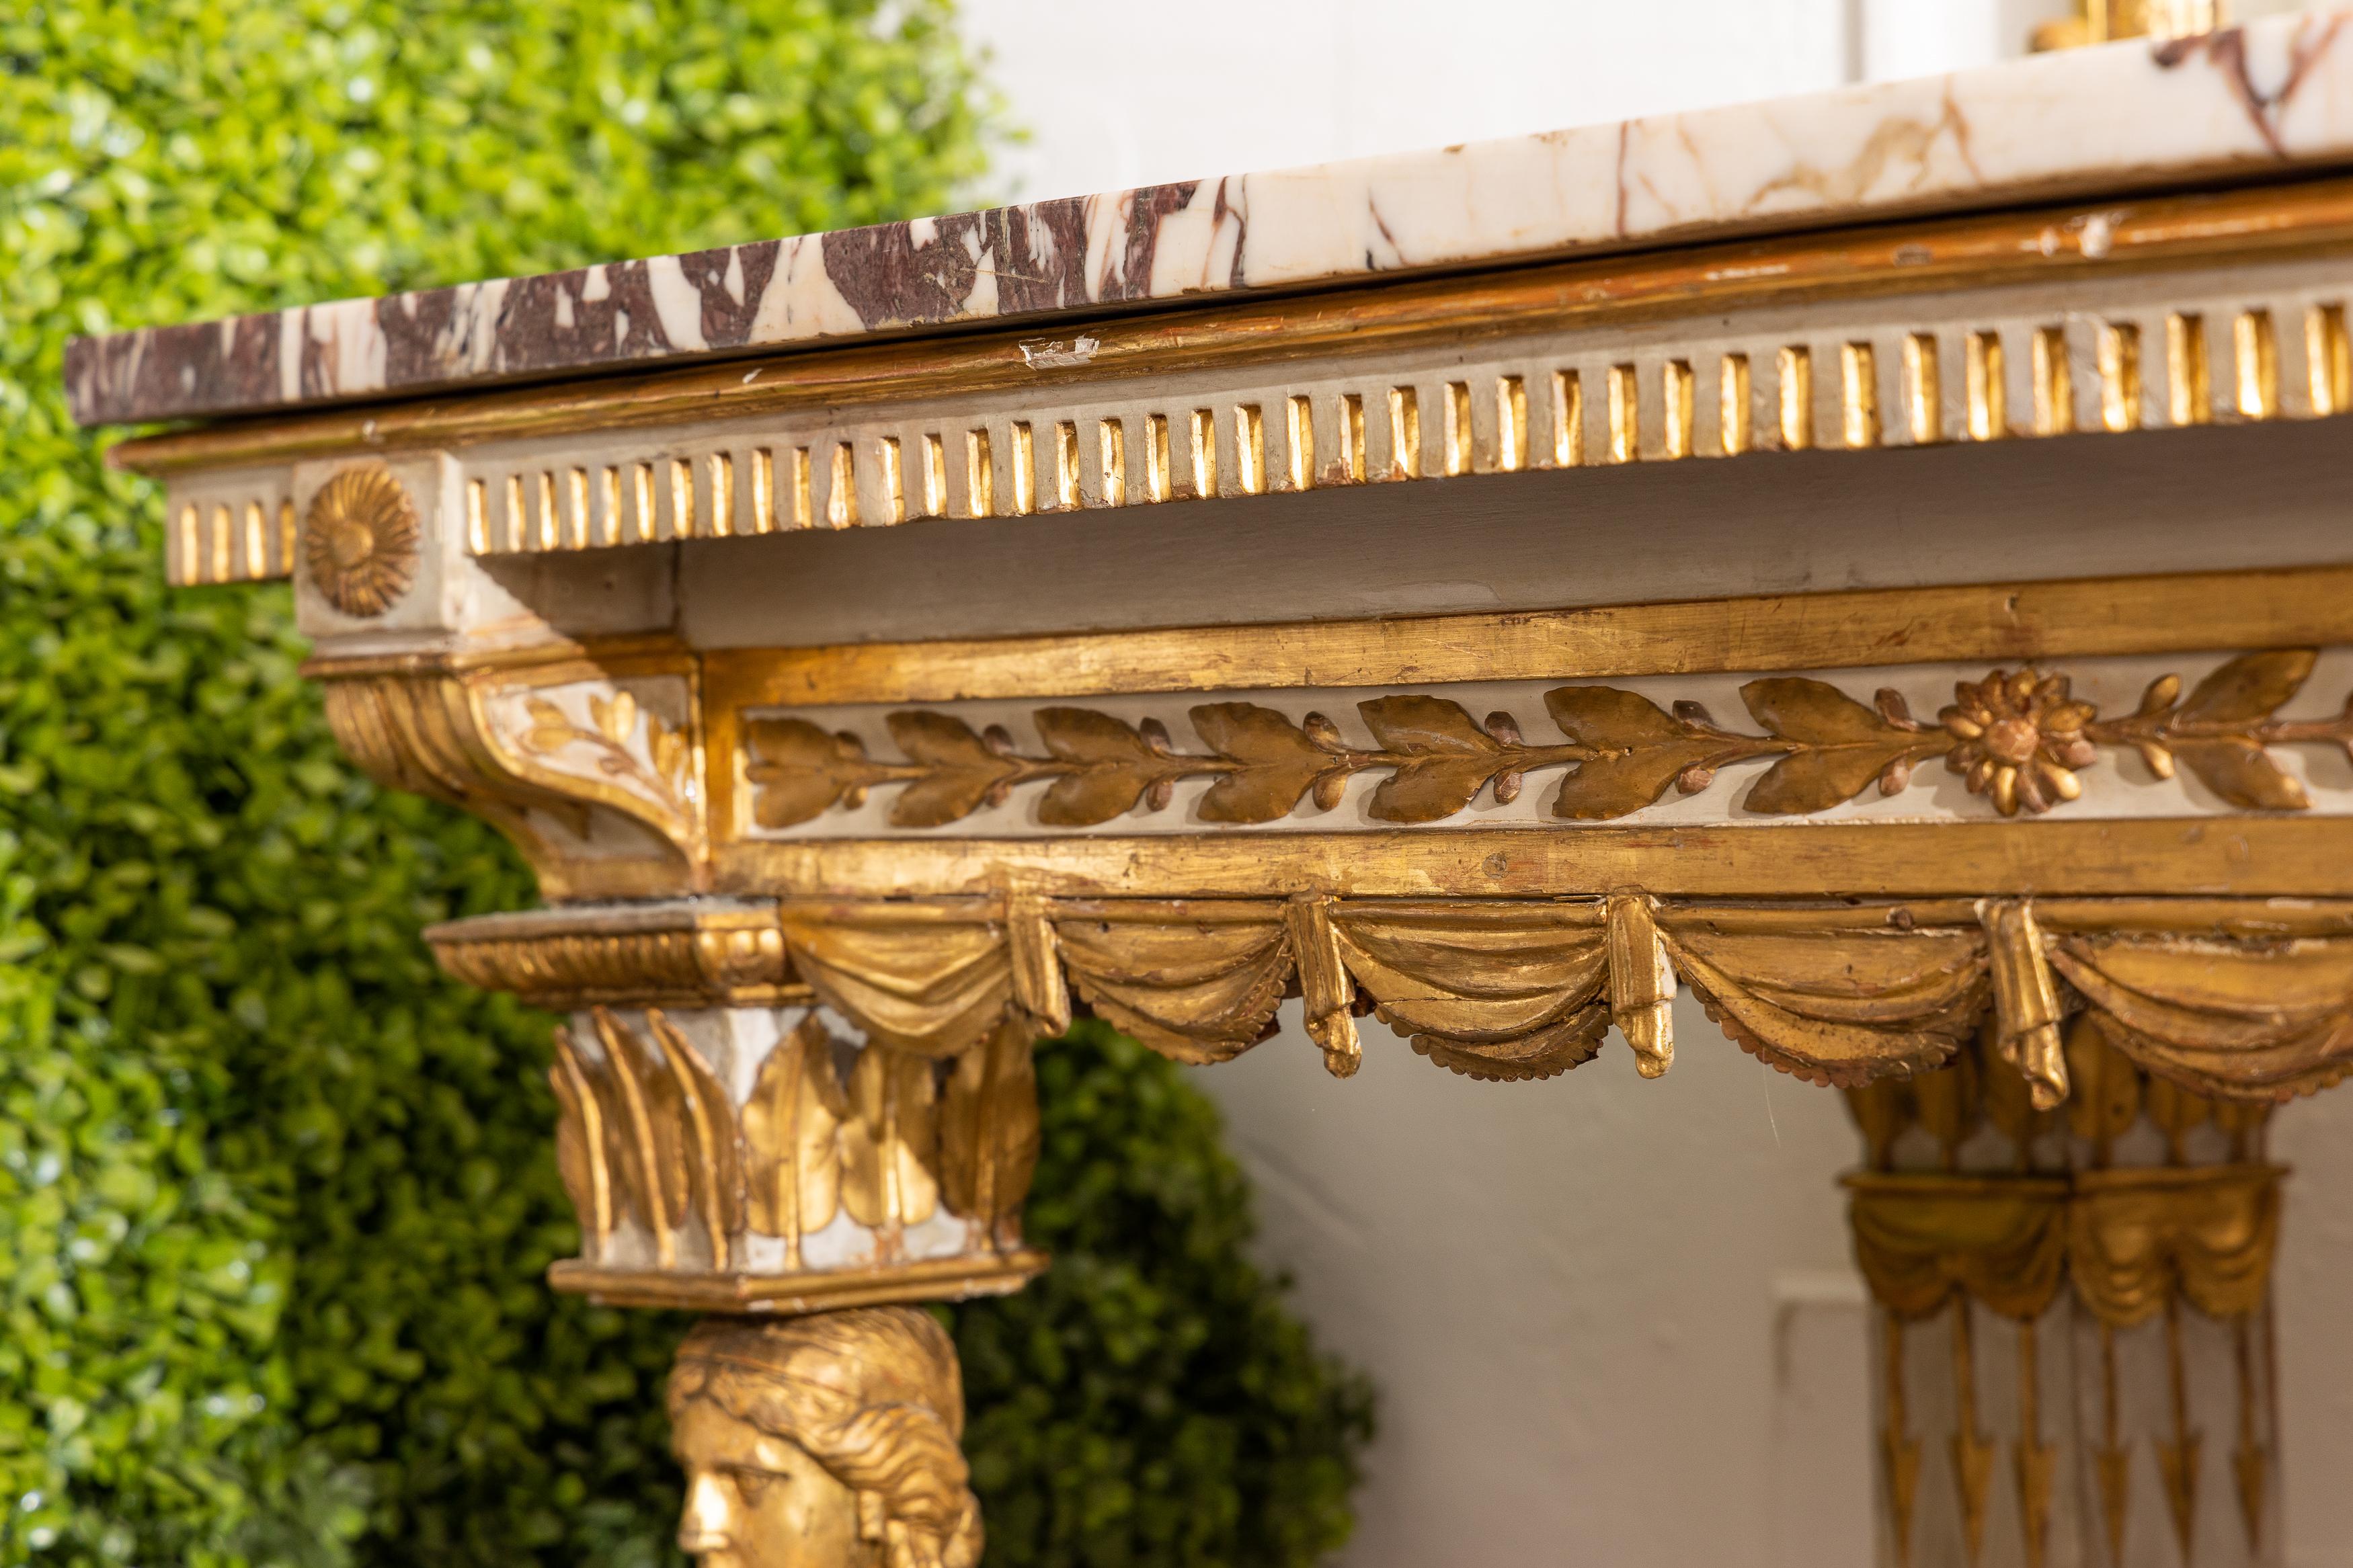 This is a lovely 19th century Italian cream-painted and parcel gilt neo-classical console, the white variegated marble top over an ornamental freeze, supported by straight reeded legs.